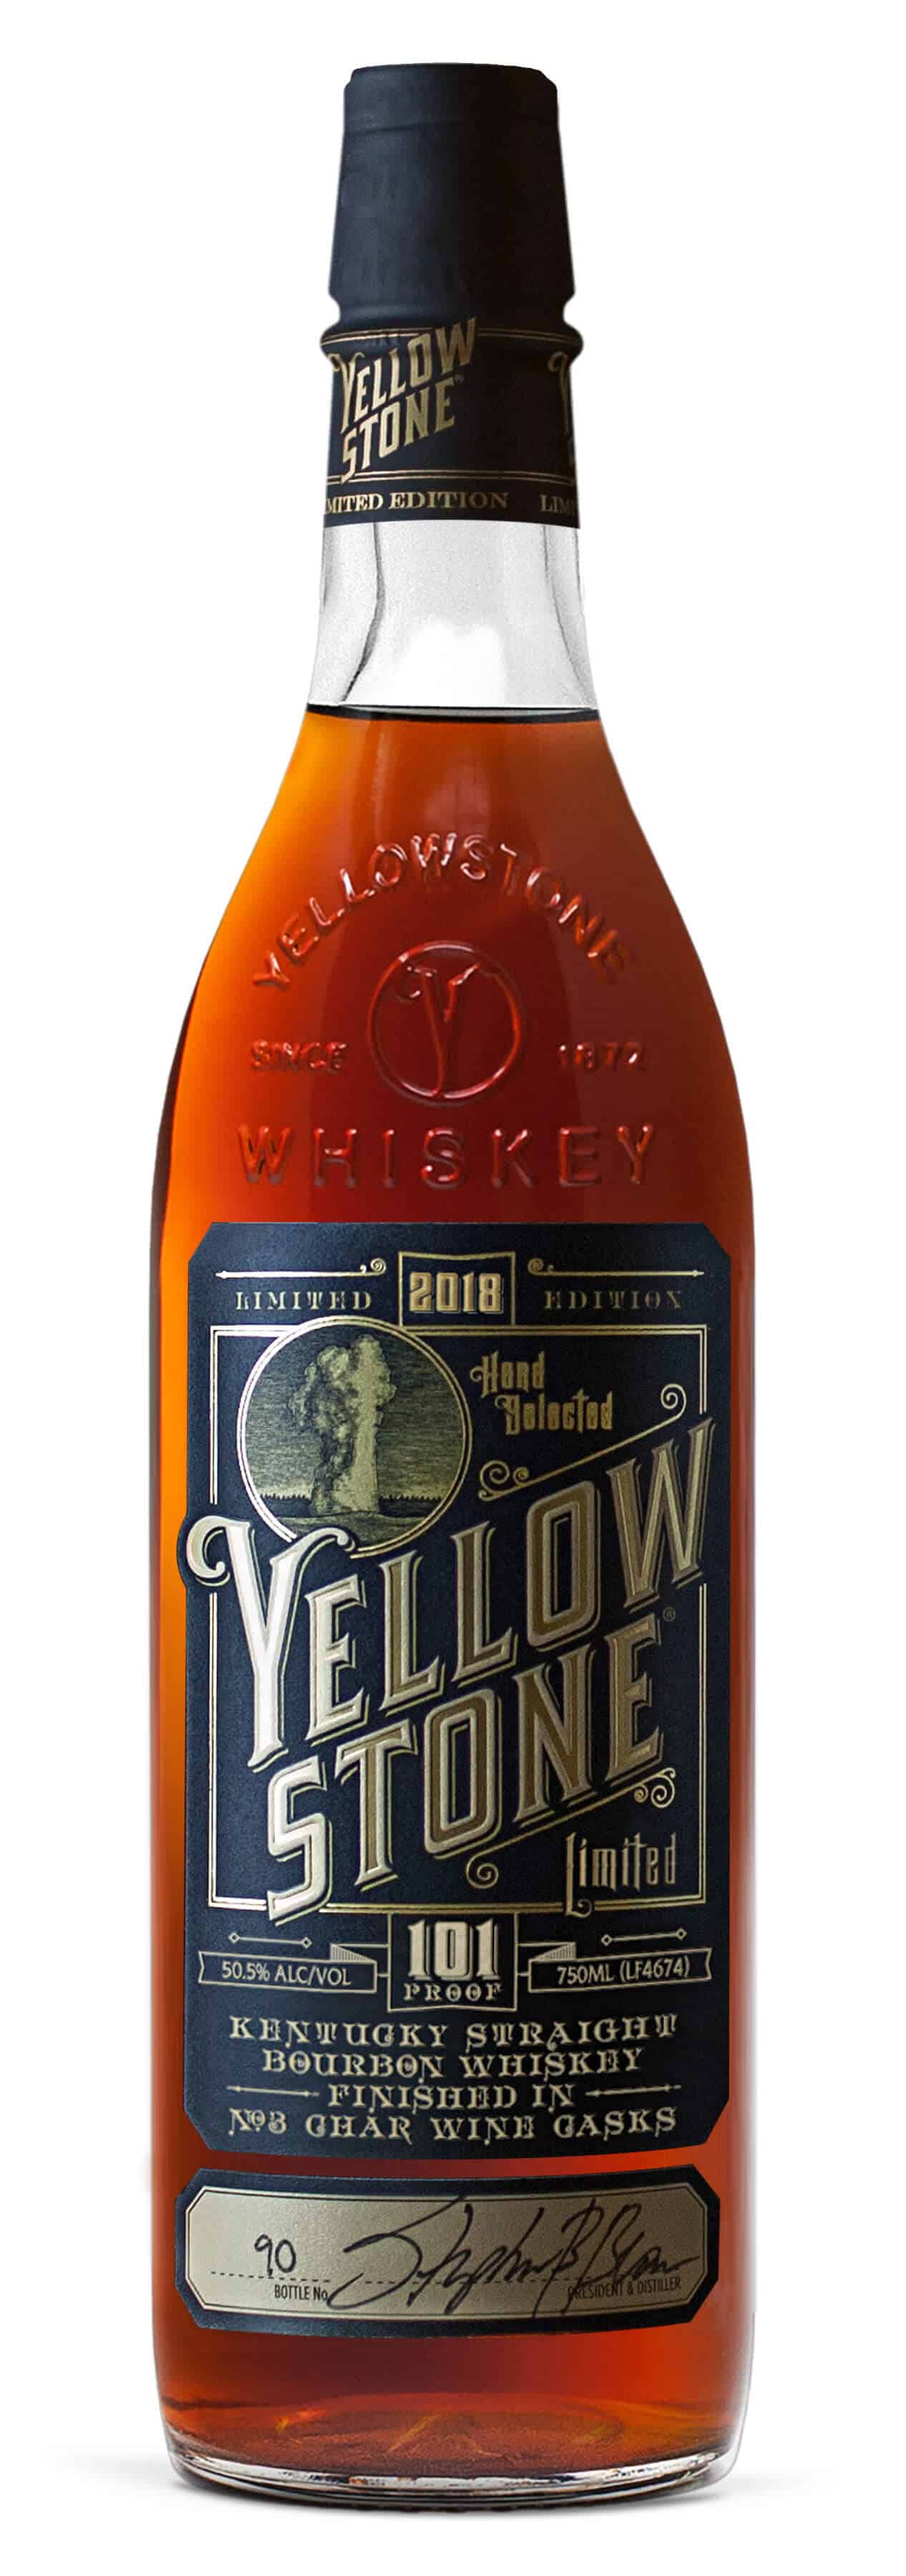 Yellowstone 101 - Yellowstone® Limited Edition Kentucky Straight Bourbon 2018 Launches this Month